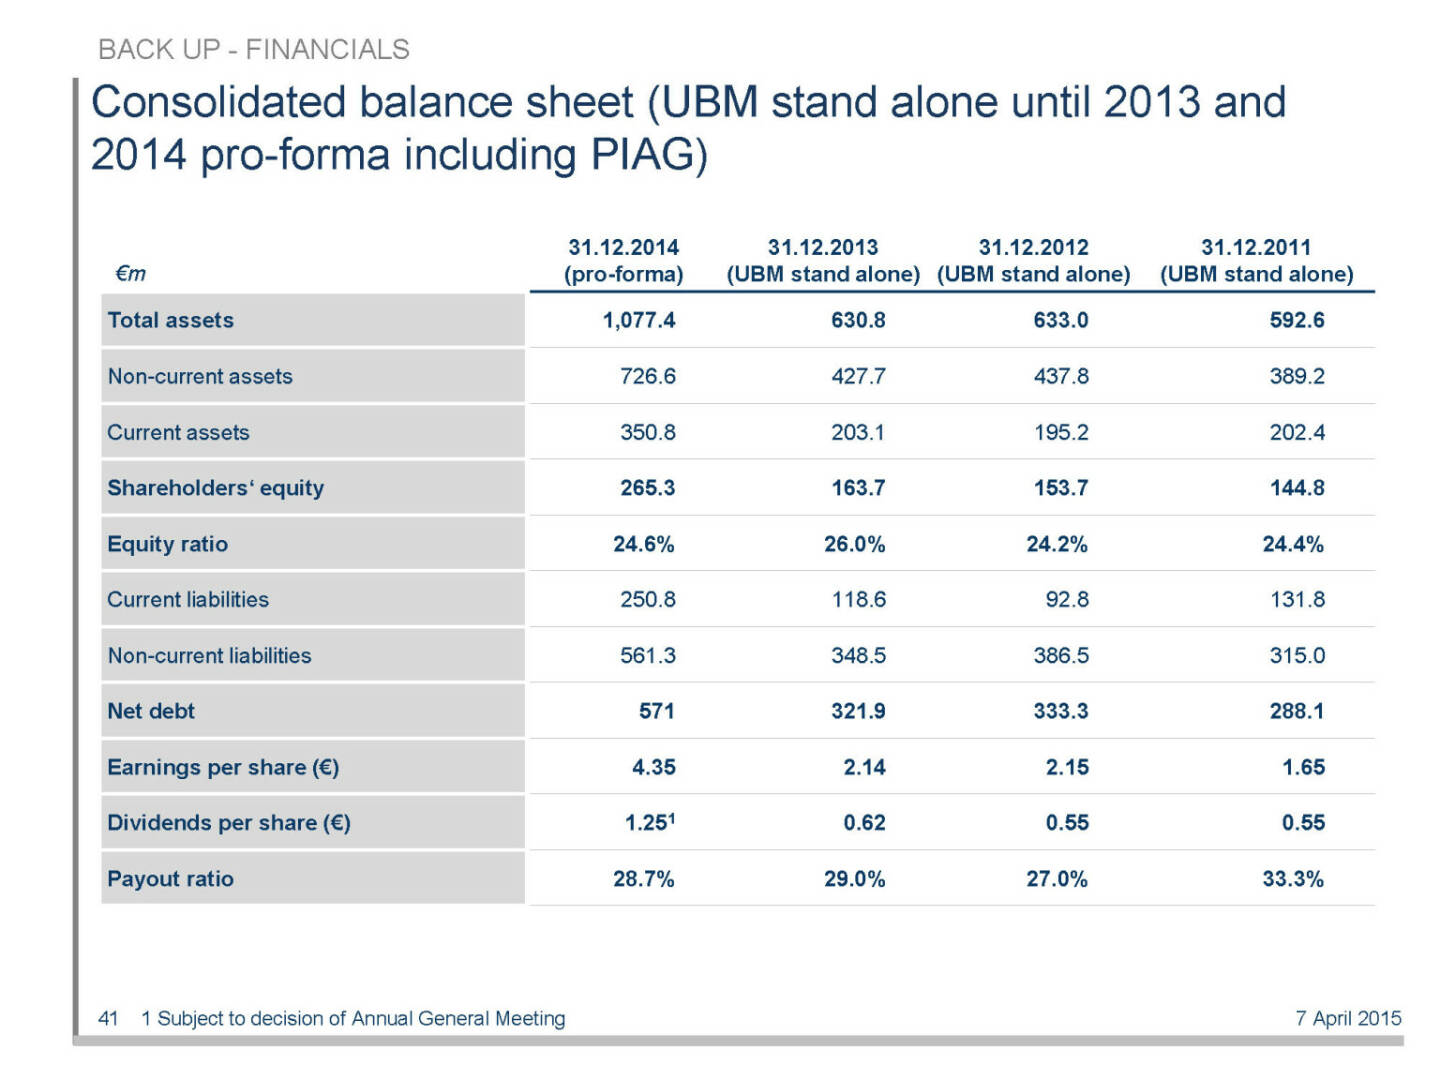 Consolidated balance sheet (UBM stand alone until 2013 and 2014 pro-forma including PIAG)